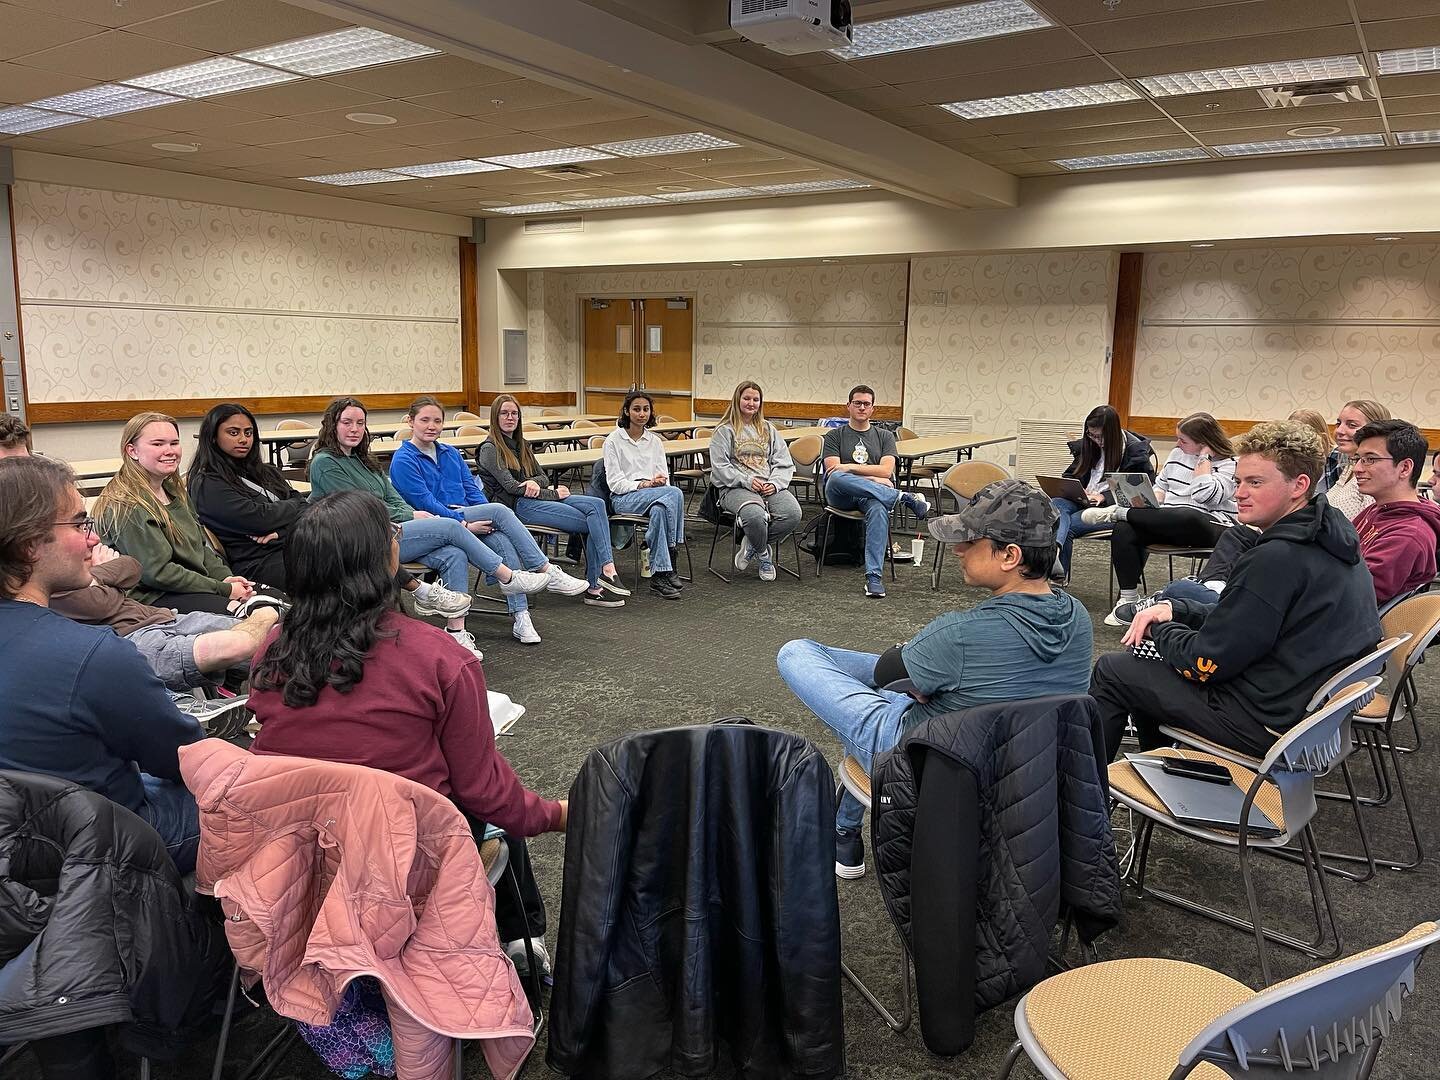 Thanks to everyone who came out to our March general meeting! We loved hearing everyone&rsquo;s thoughts on Slaughterhouse Five and Aristotle and Dante Discover the Secrets of the Universe!